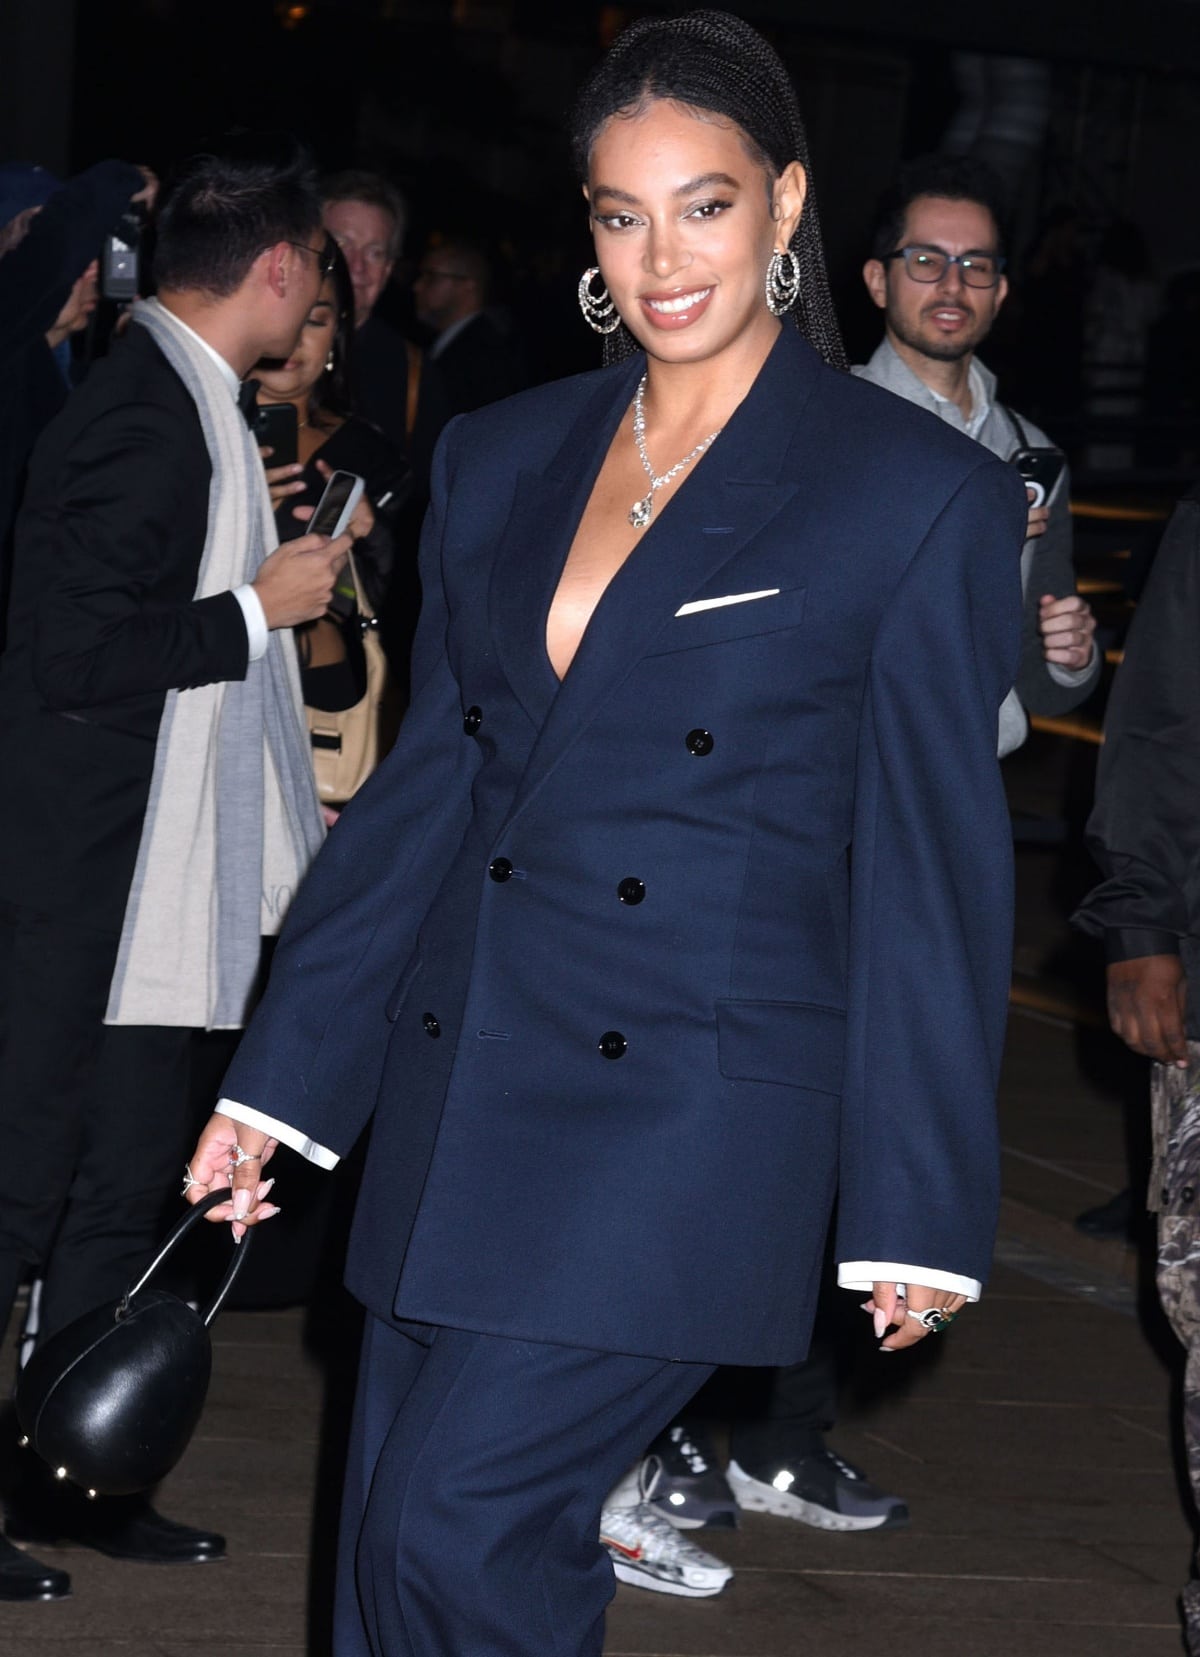 Solange Knowles attending the NYC Ballet Fashion Gala at the David H. Koch Theater in Lincoln Center